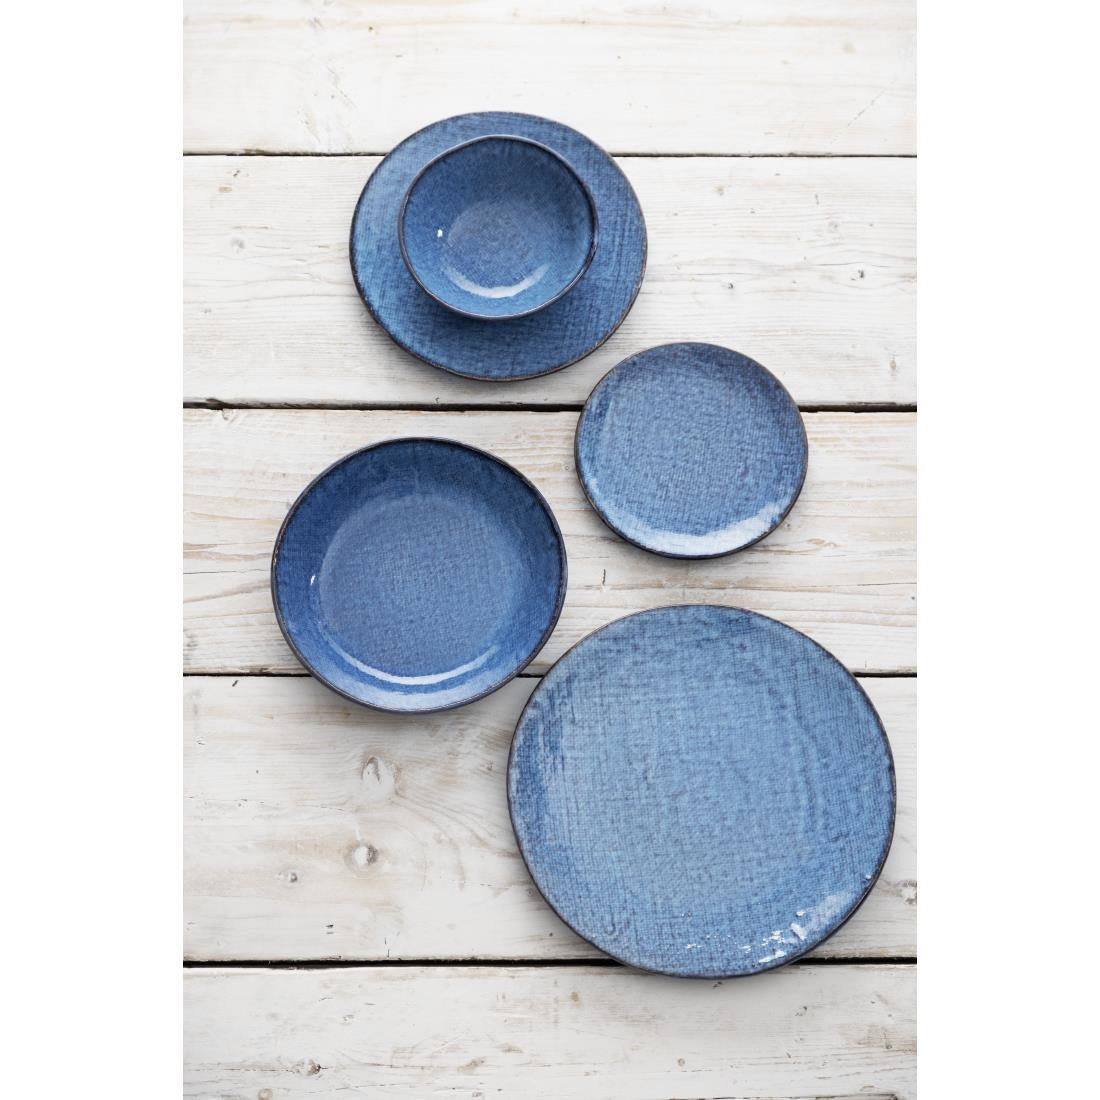 FU220 Olympia Denim Blue Coupe Plates 180mm (Pack of 6)